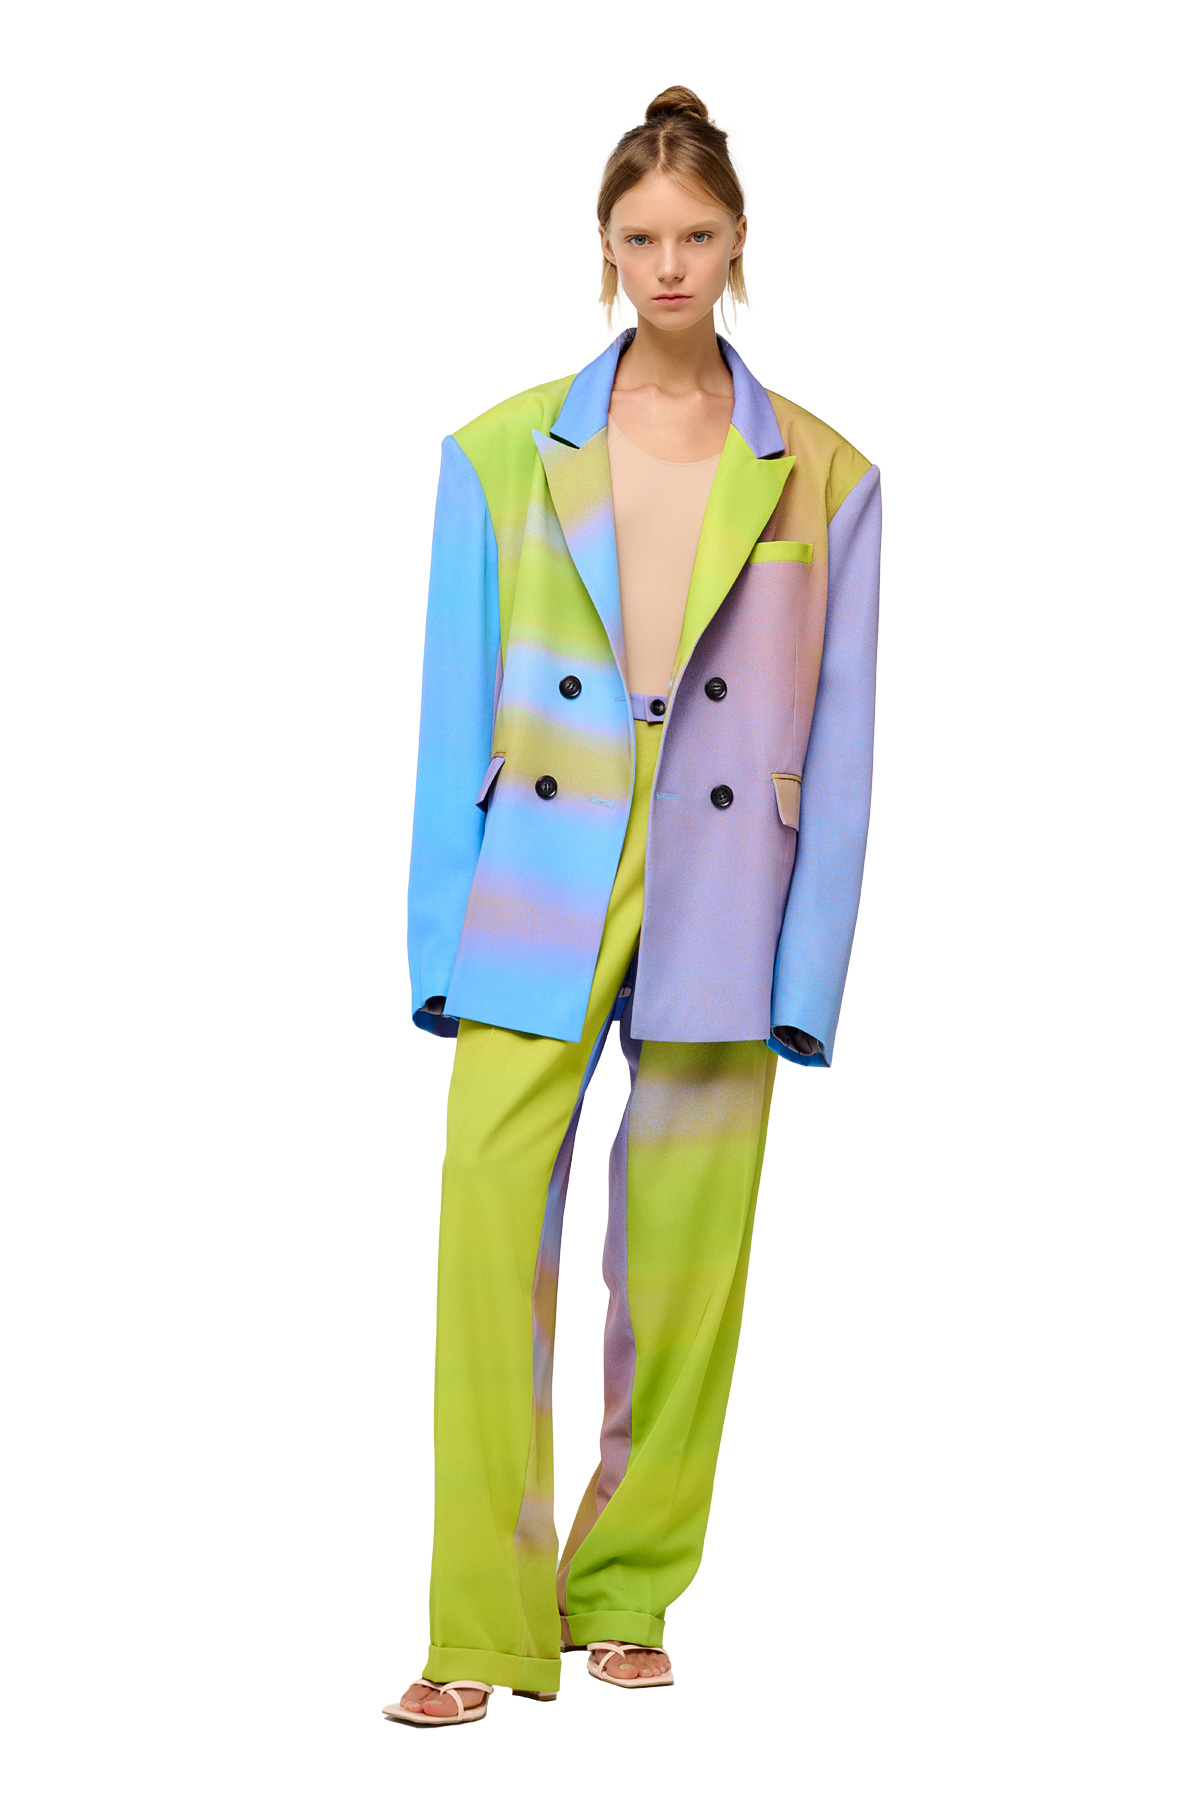 Berhasm double-breasted blazer with Yellow sunrise print